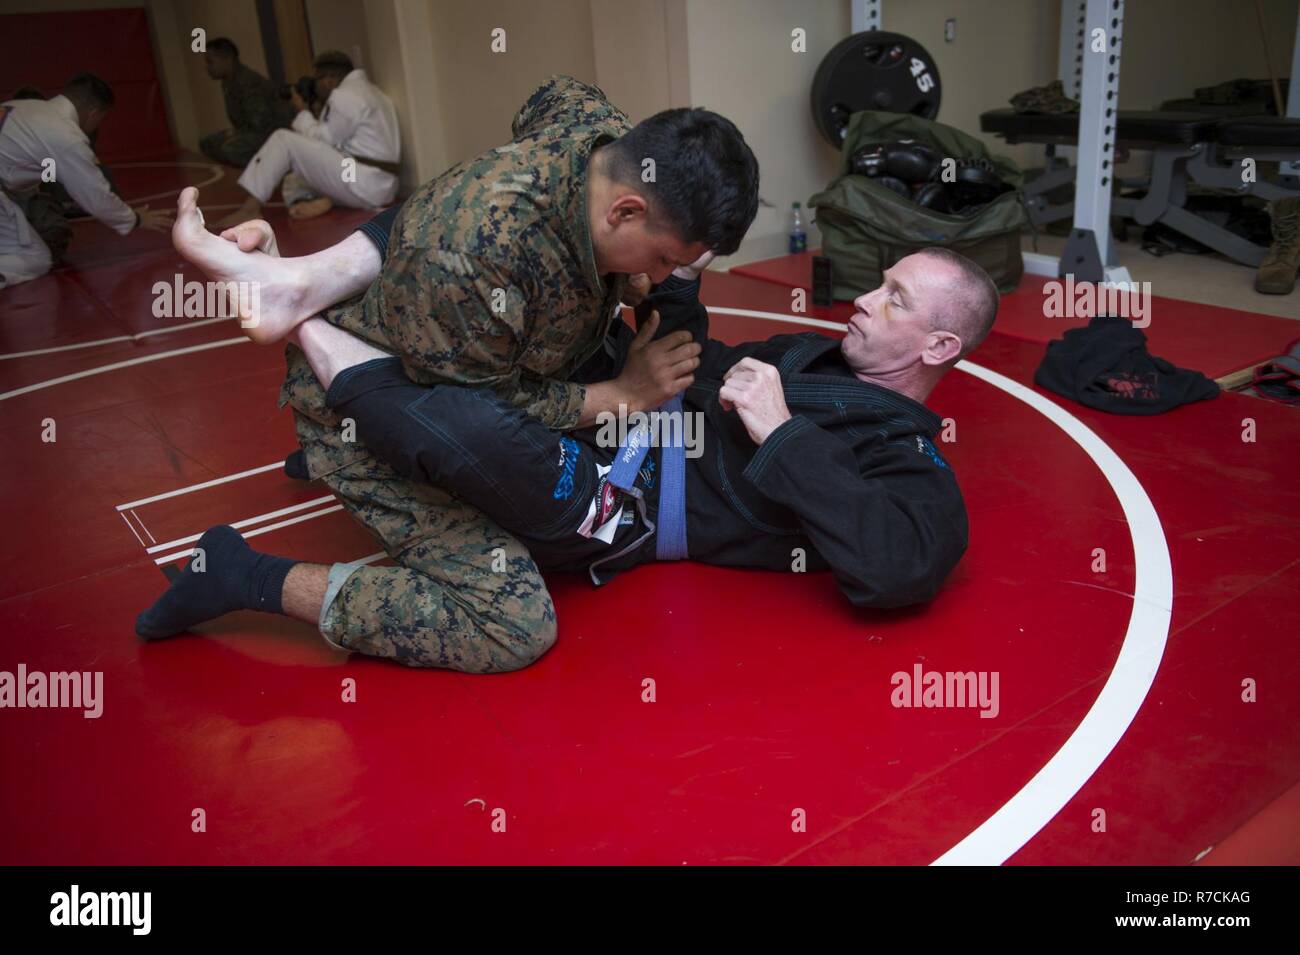 U.S. Marines practice Brazilian Jujitsu grappling techniques during a Martial Arts Instructors Course (MAIC) at Yale Hall, Marine Corps Base Quantico, Va., May 11, 2017. The MAIC is a three week long course that puts applicants through rigorous training designed to instill teamwork and develop leadership abilities necessary for a Marine Corps Martial Arts Program instructor to teach classes. Stock Photo